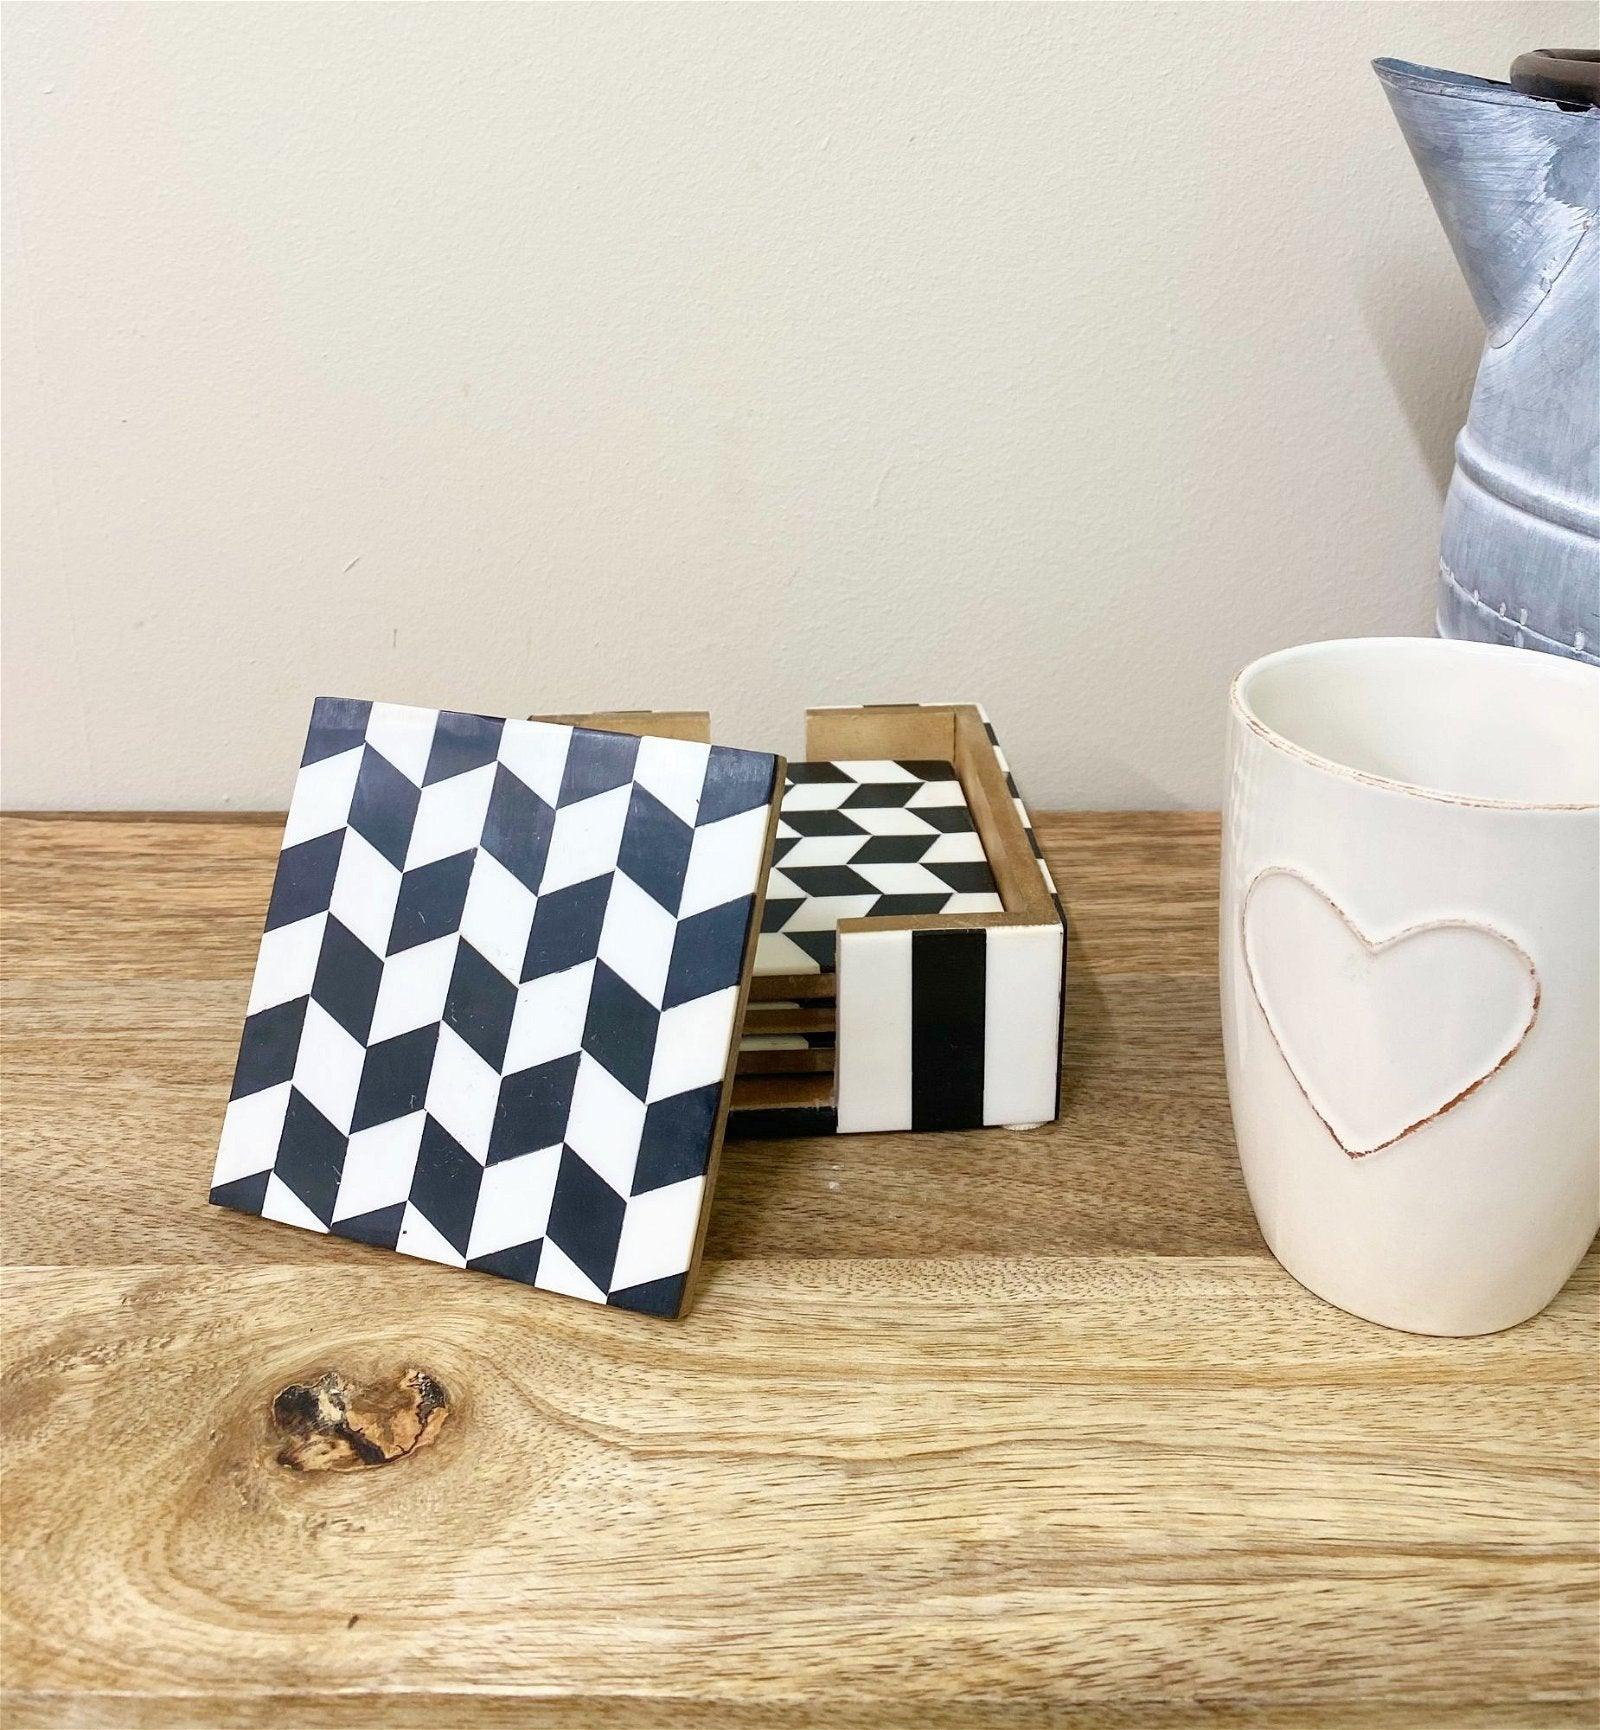 Pack of 4 Black & White Herringbone Wooden Coasters - £20.99 - Coasters & Placemats 